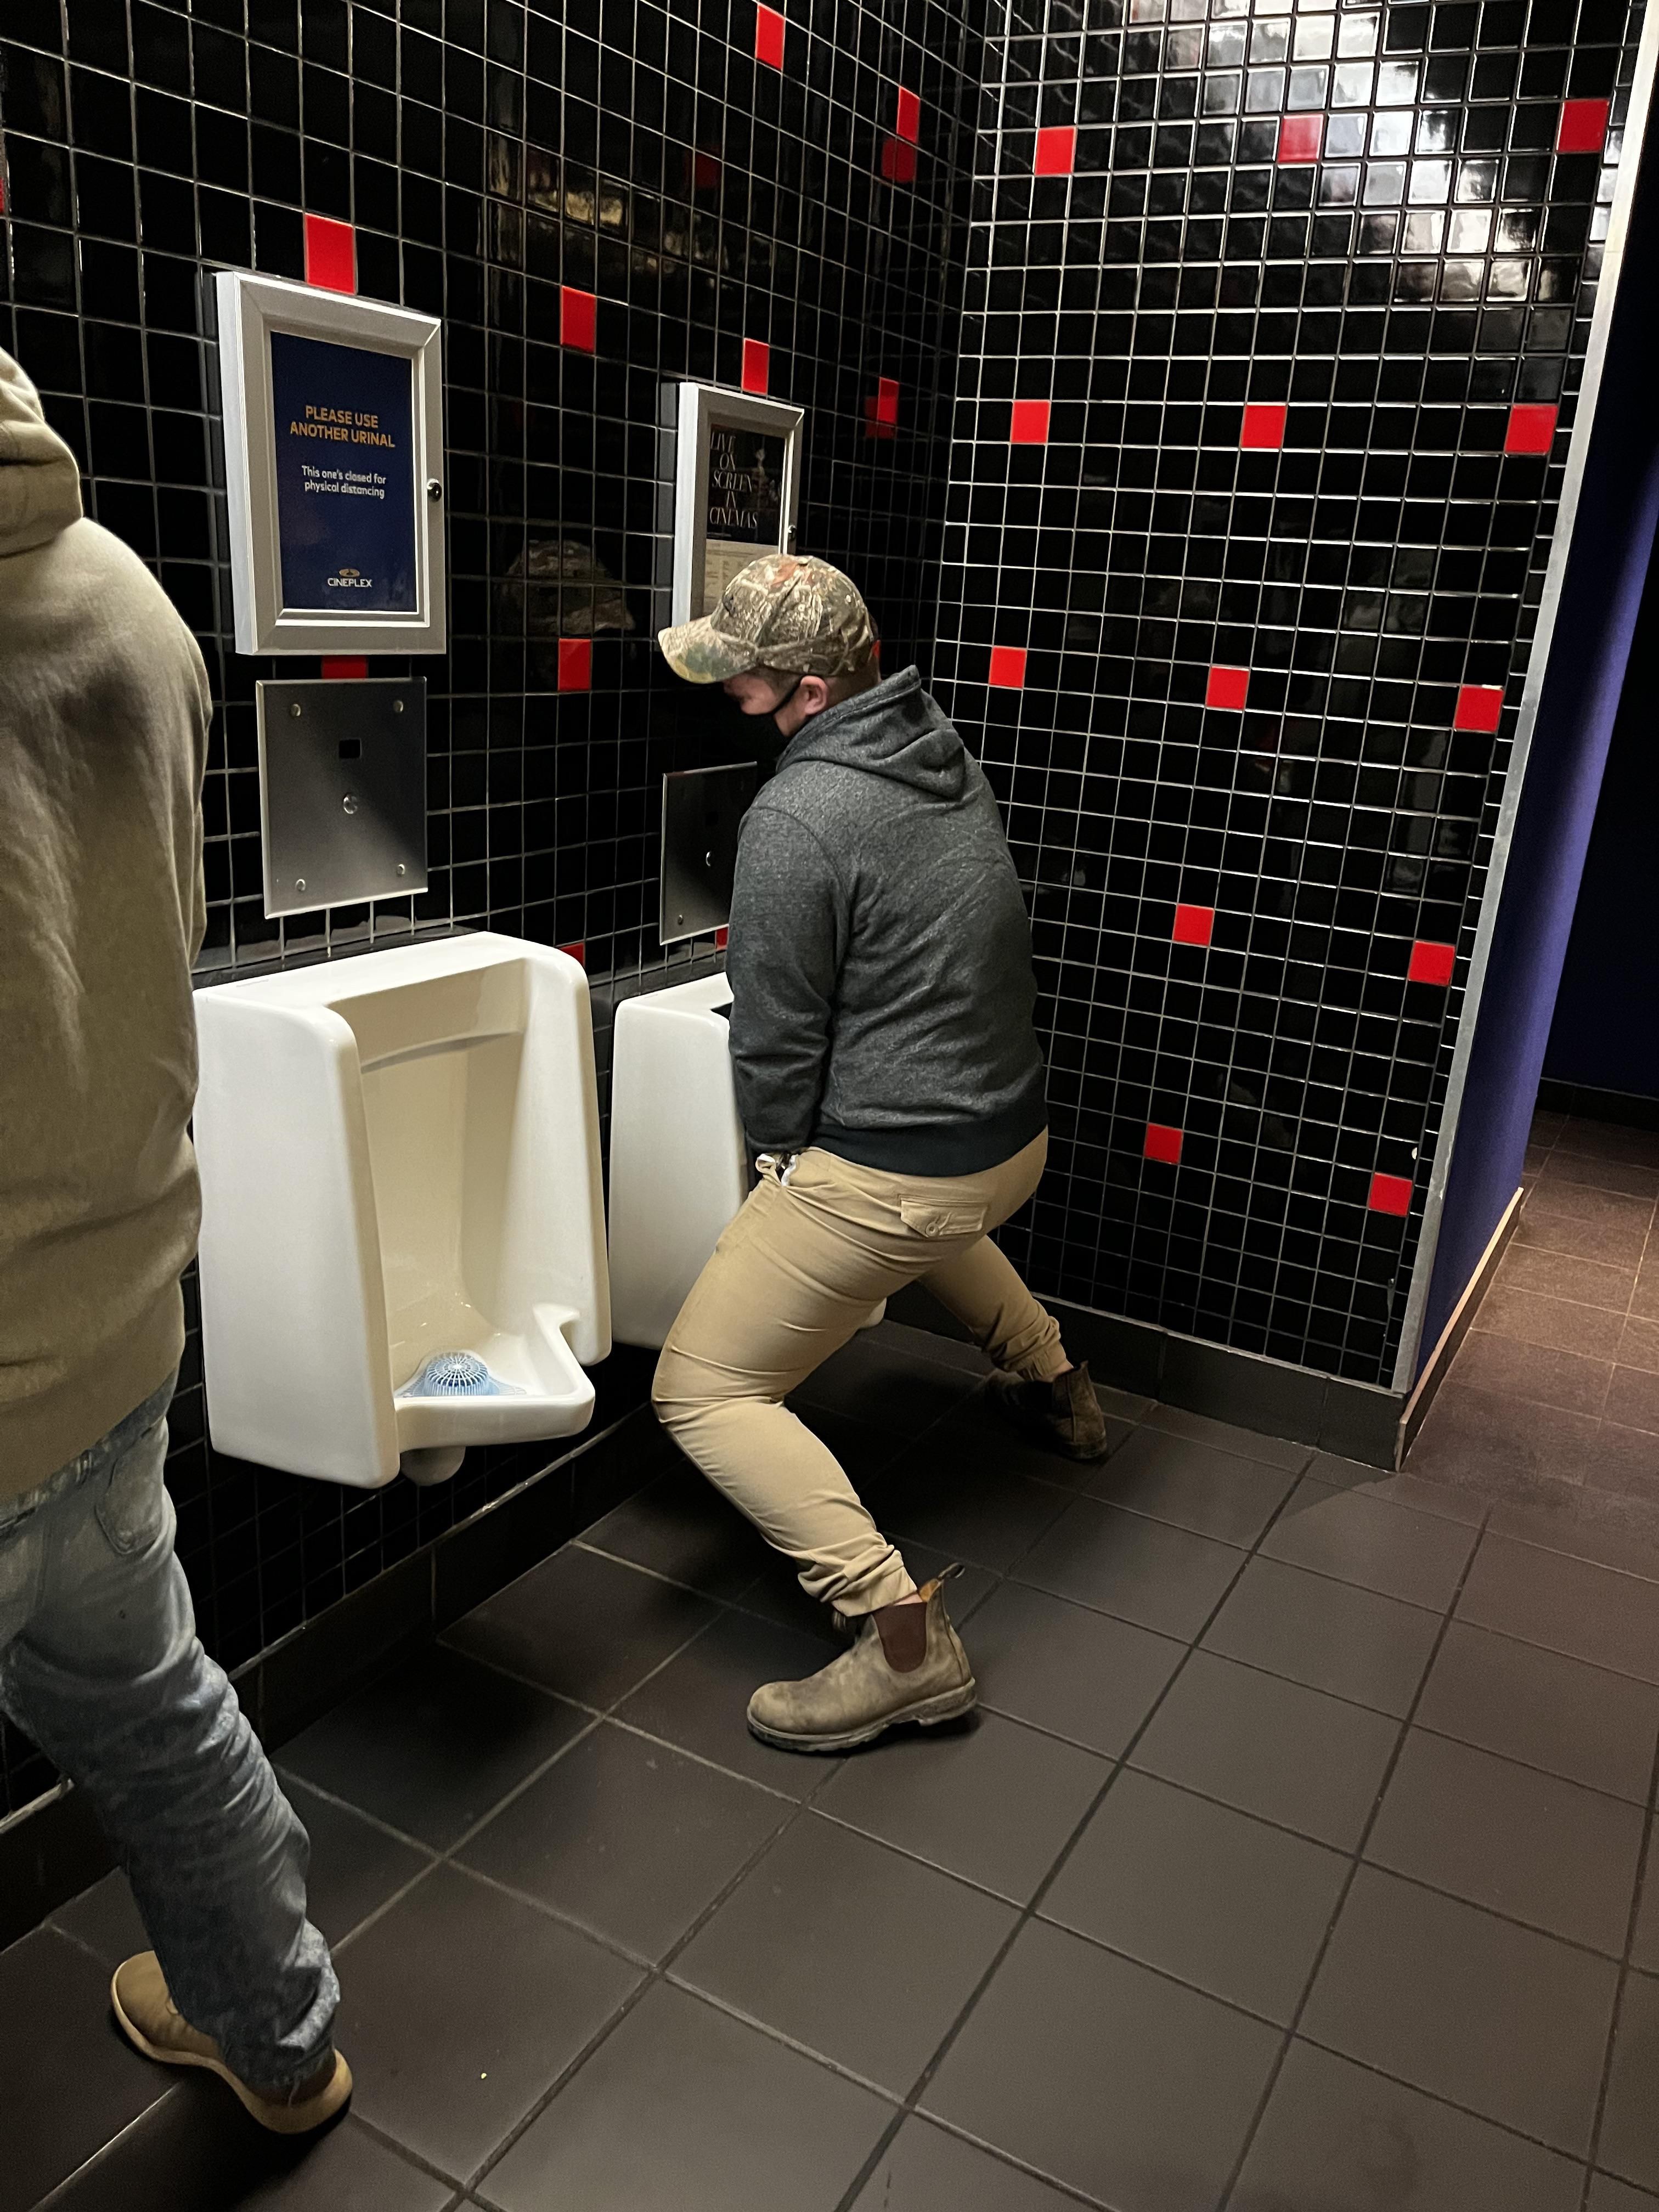 Never use the middle urinal, no matter what…